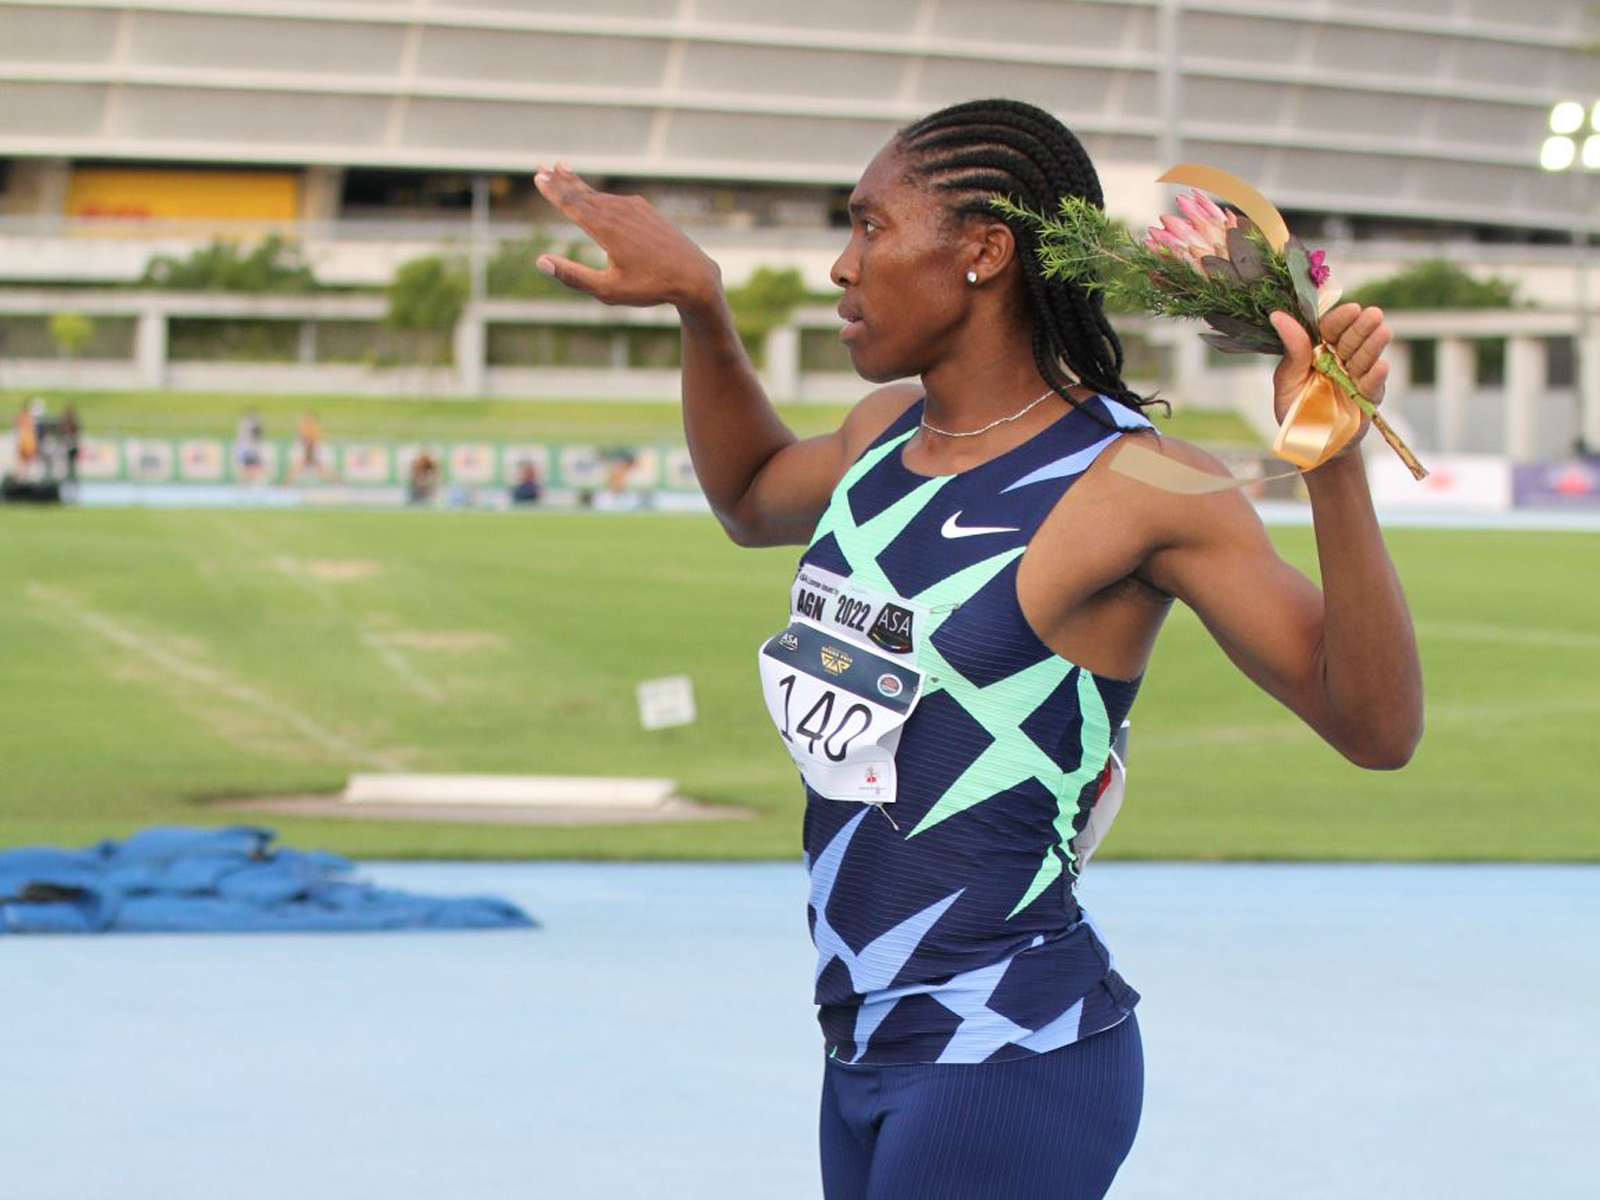 Caster Semenya clocked a personal best of 8:54.97 to win the women’s 3,000m in Cape Town / Photo Credit: Tladi Khuele